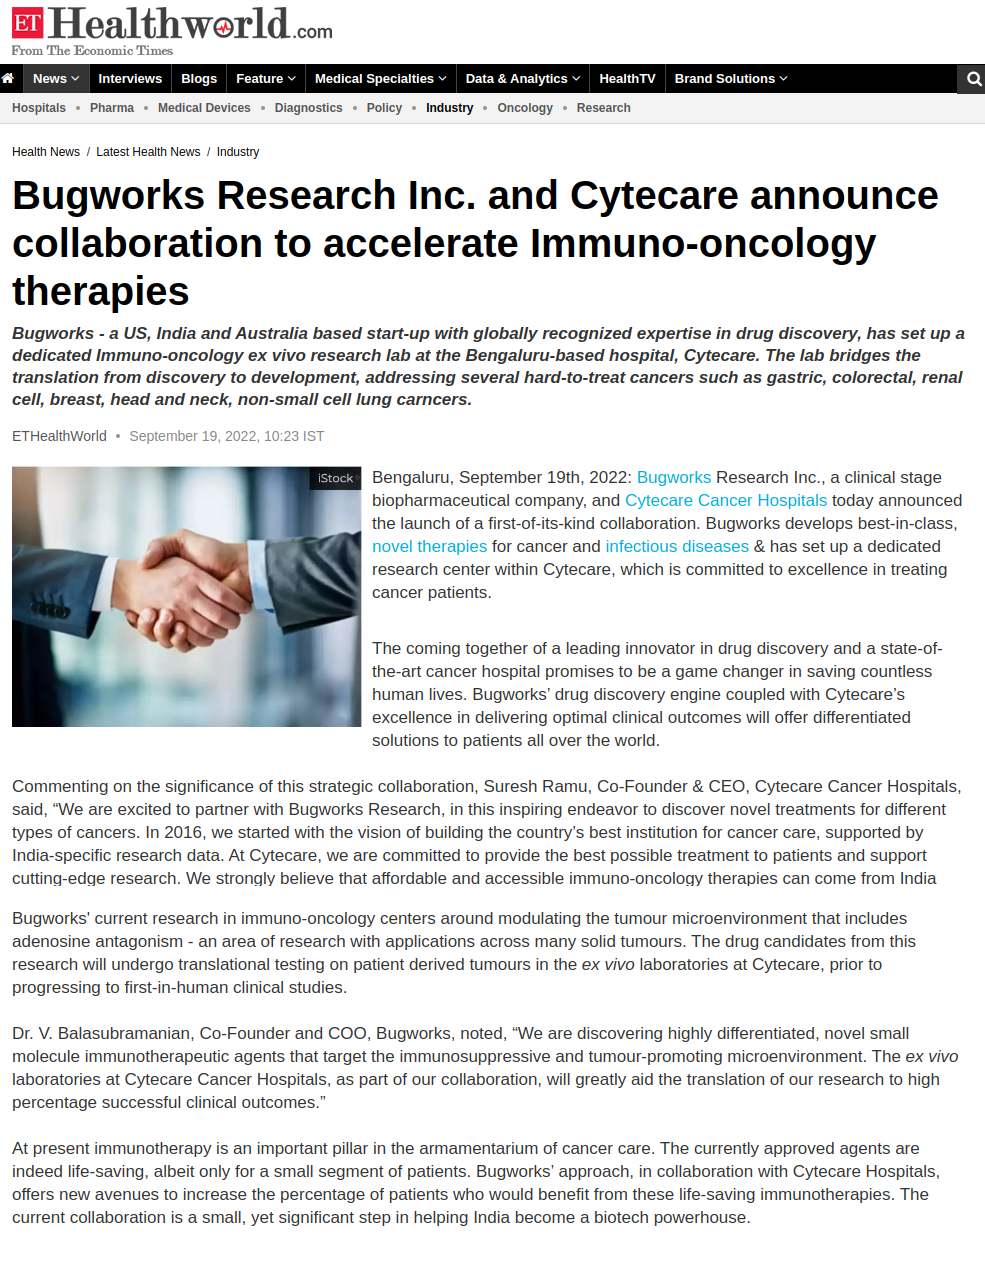 Bugworks Research & Cytecare to accelerate Immuno-oncology